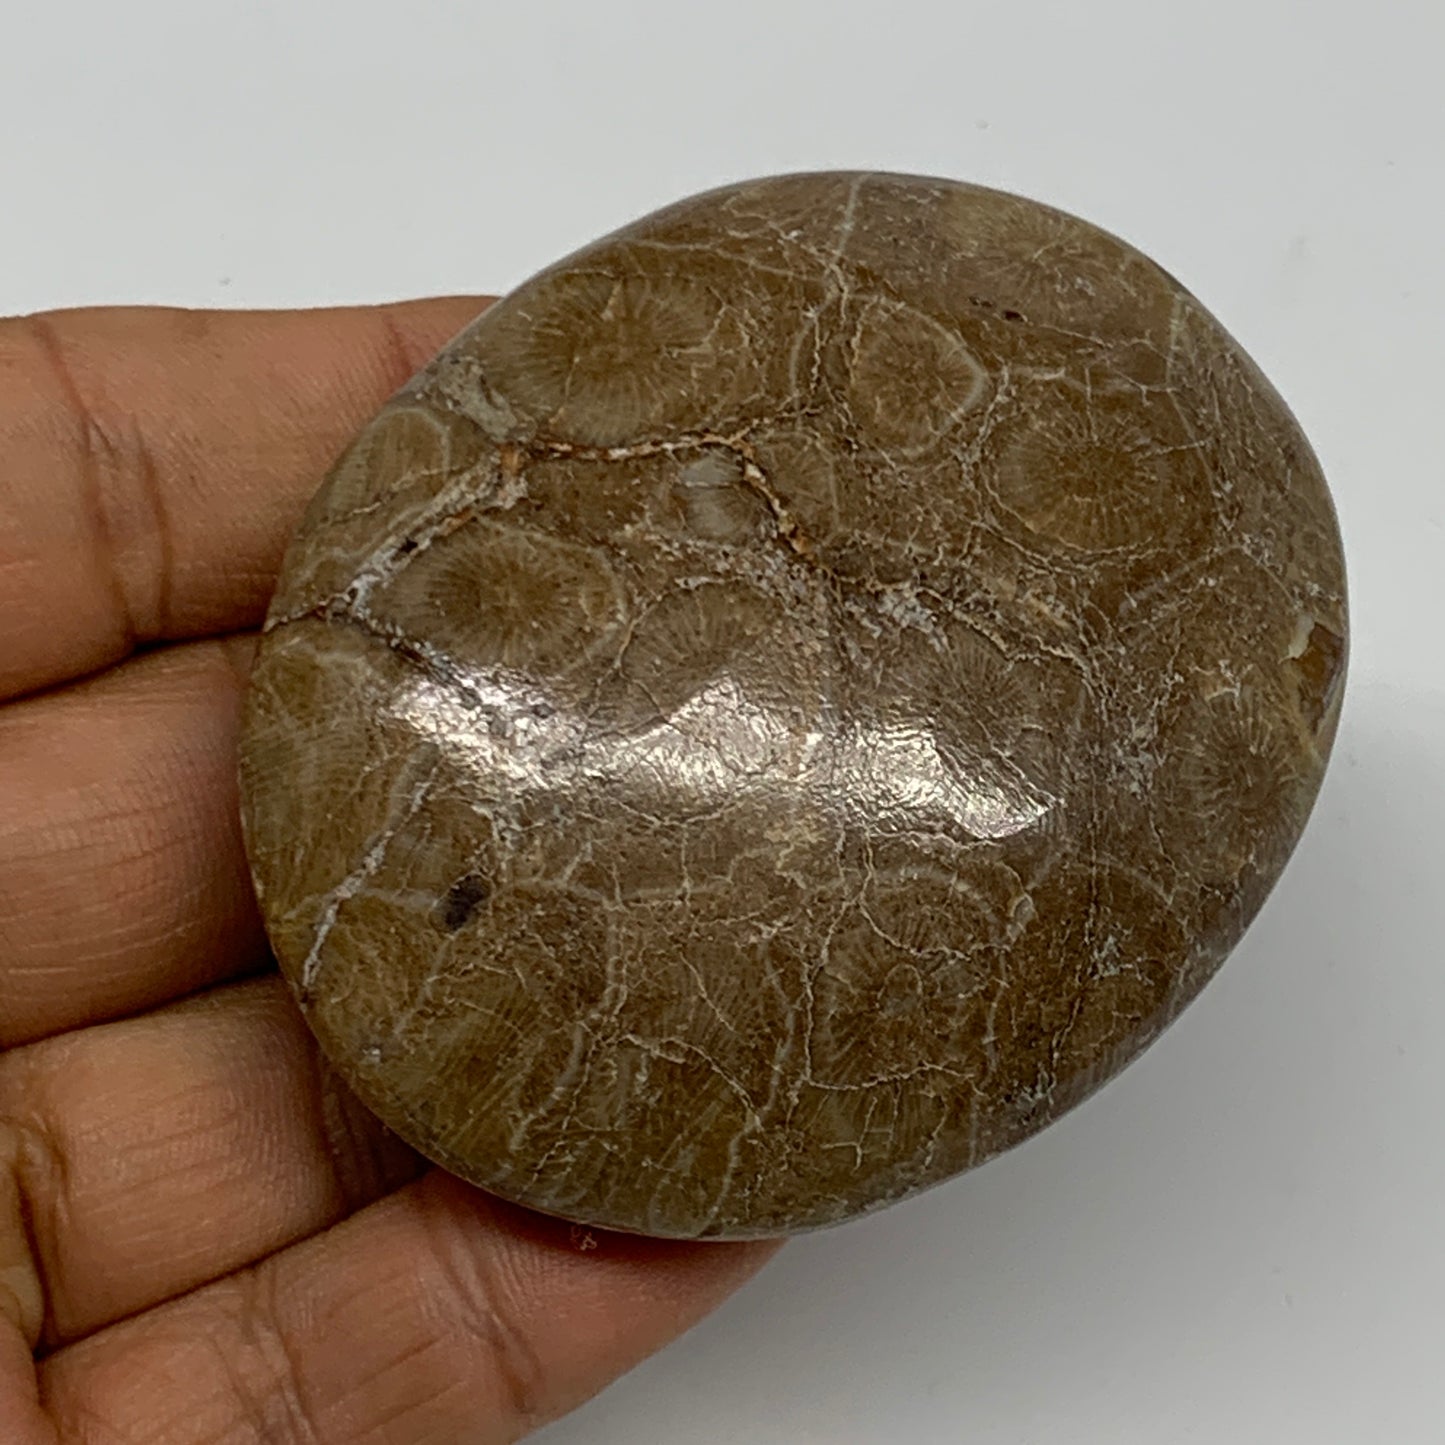 106.1g,2.5"x2.1"x 0.9", Coral Fossils Palm-Stone Polished from Morocco, B20335